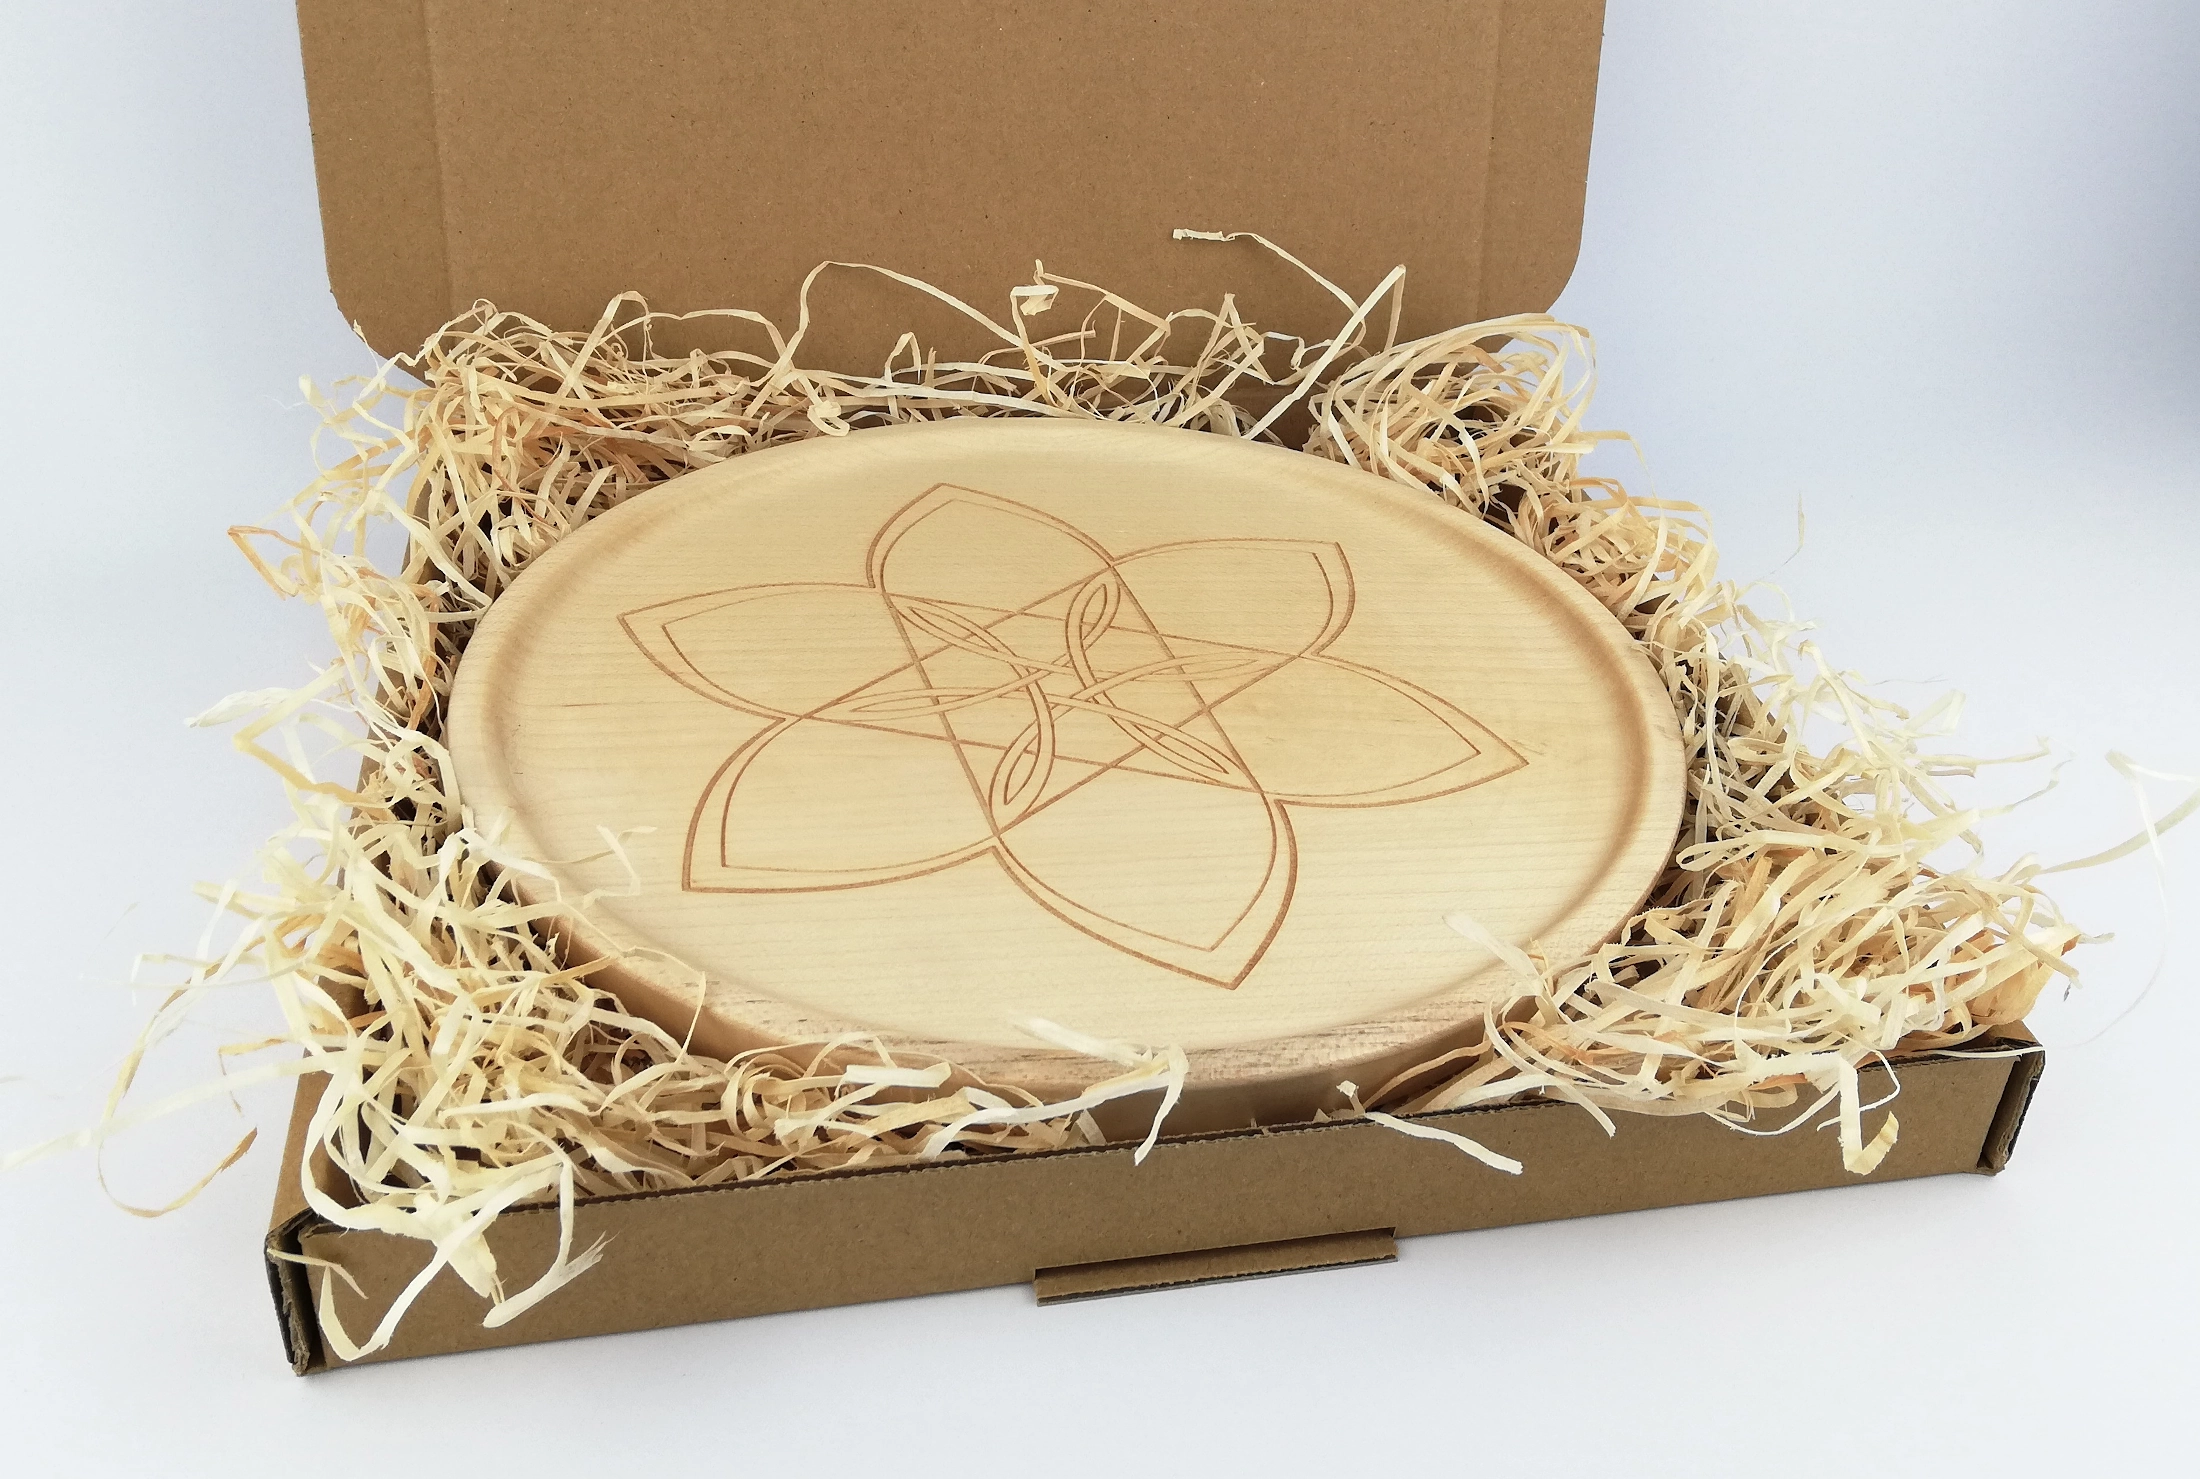 Hexagram (version 2) on a middle plate (24cm/9.4in in diameter), packed in a box.